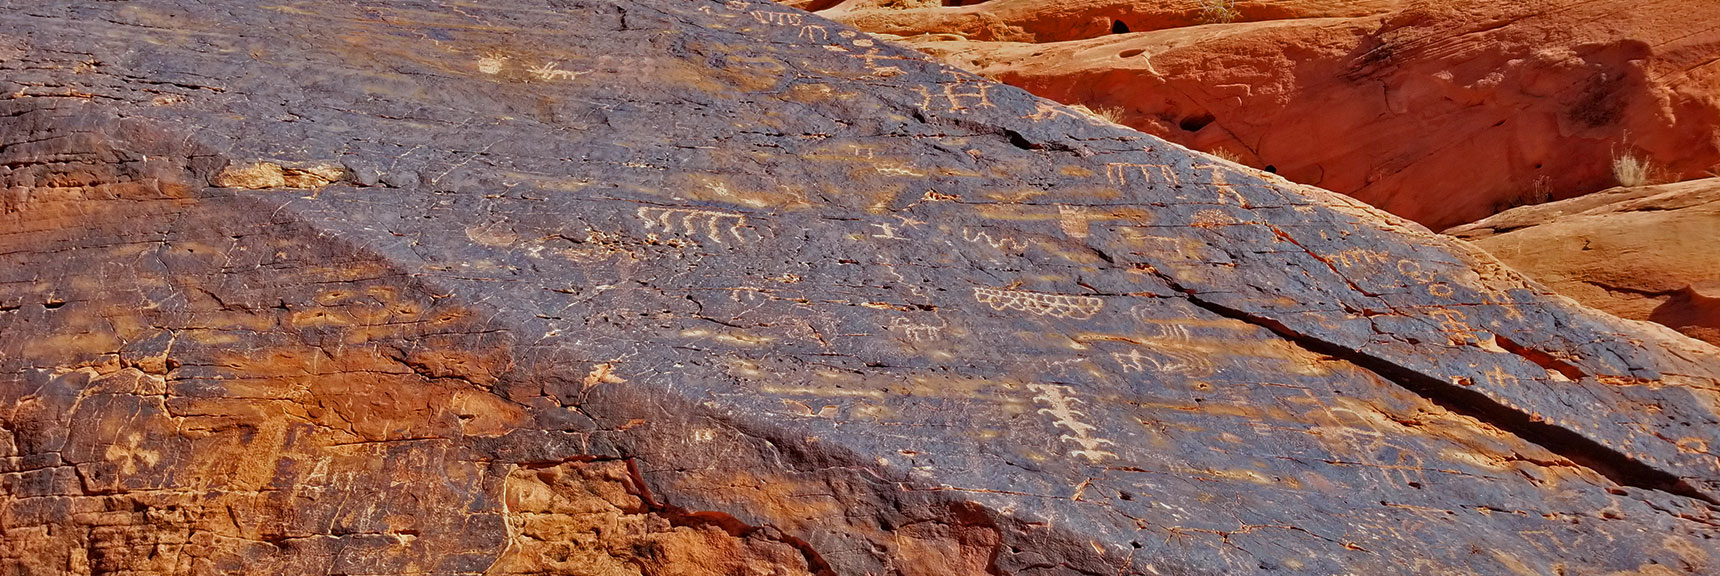 Petroglyphs on Mouse's Tank Trail in Valley of Fire State Park, Nevada, Slide 4